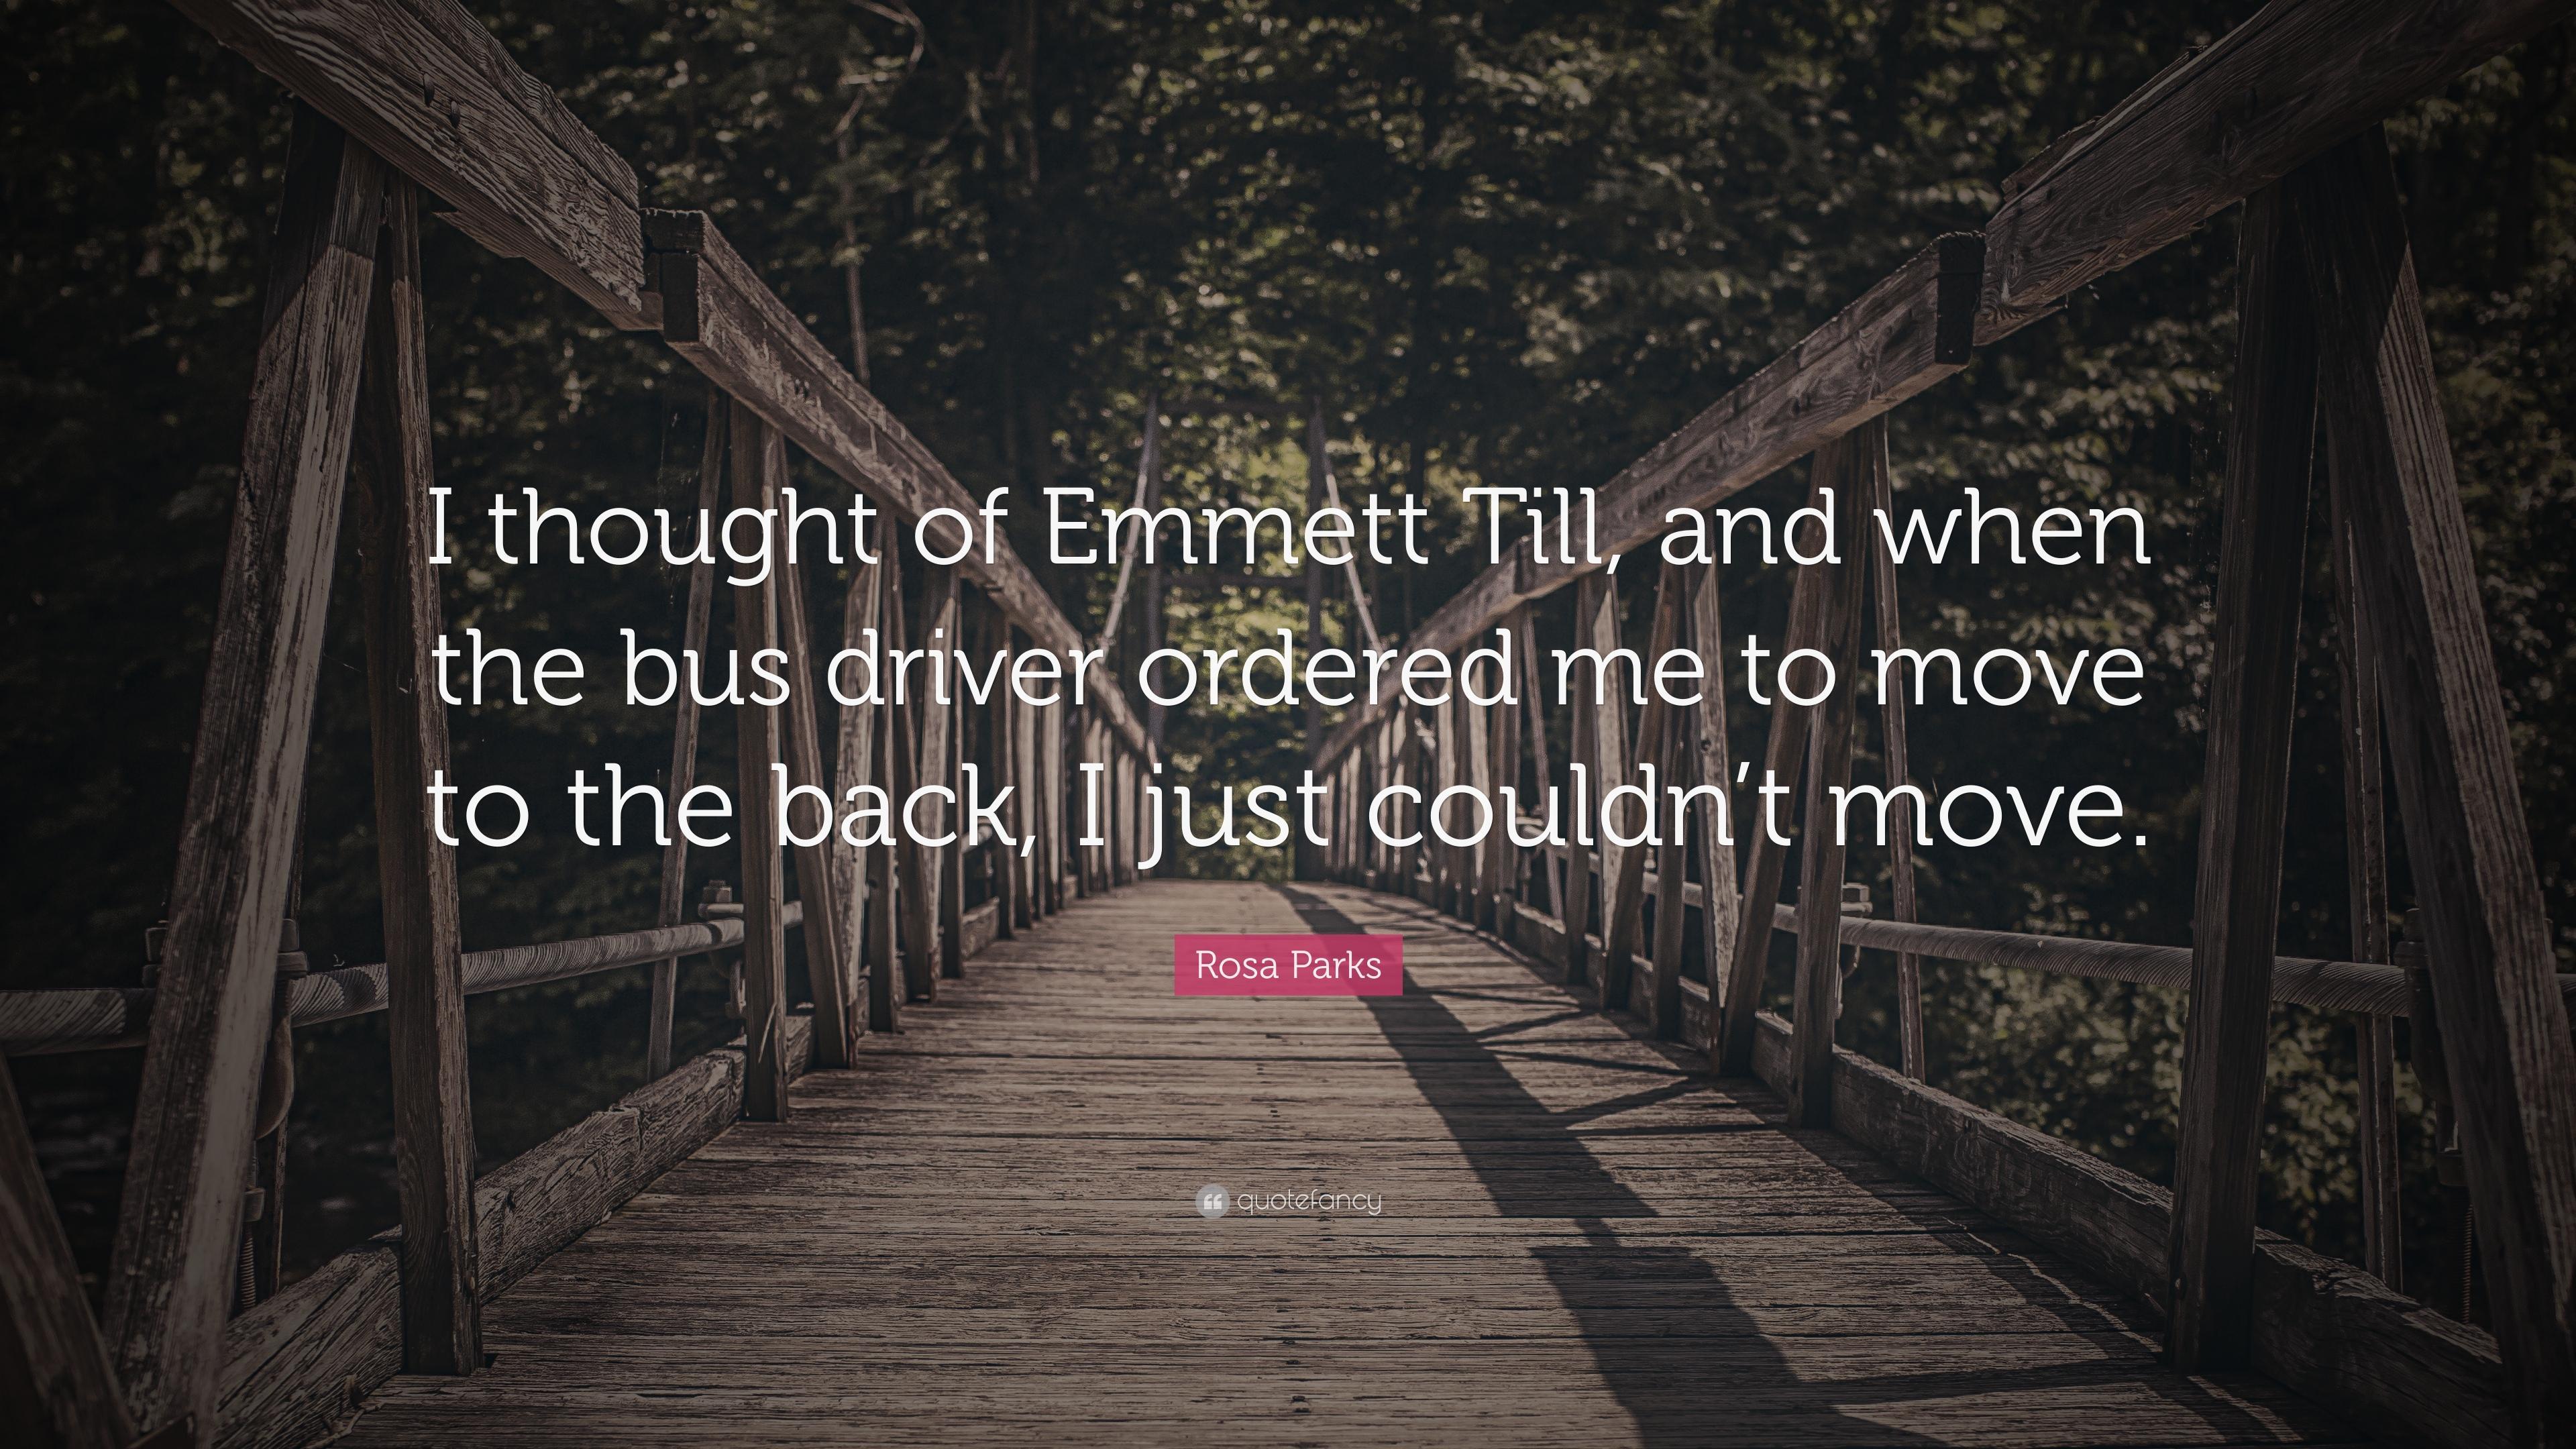 Rosa Parks Quote: “I thought of Emmett Till, and when the bus driver